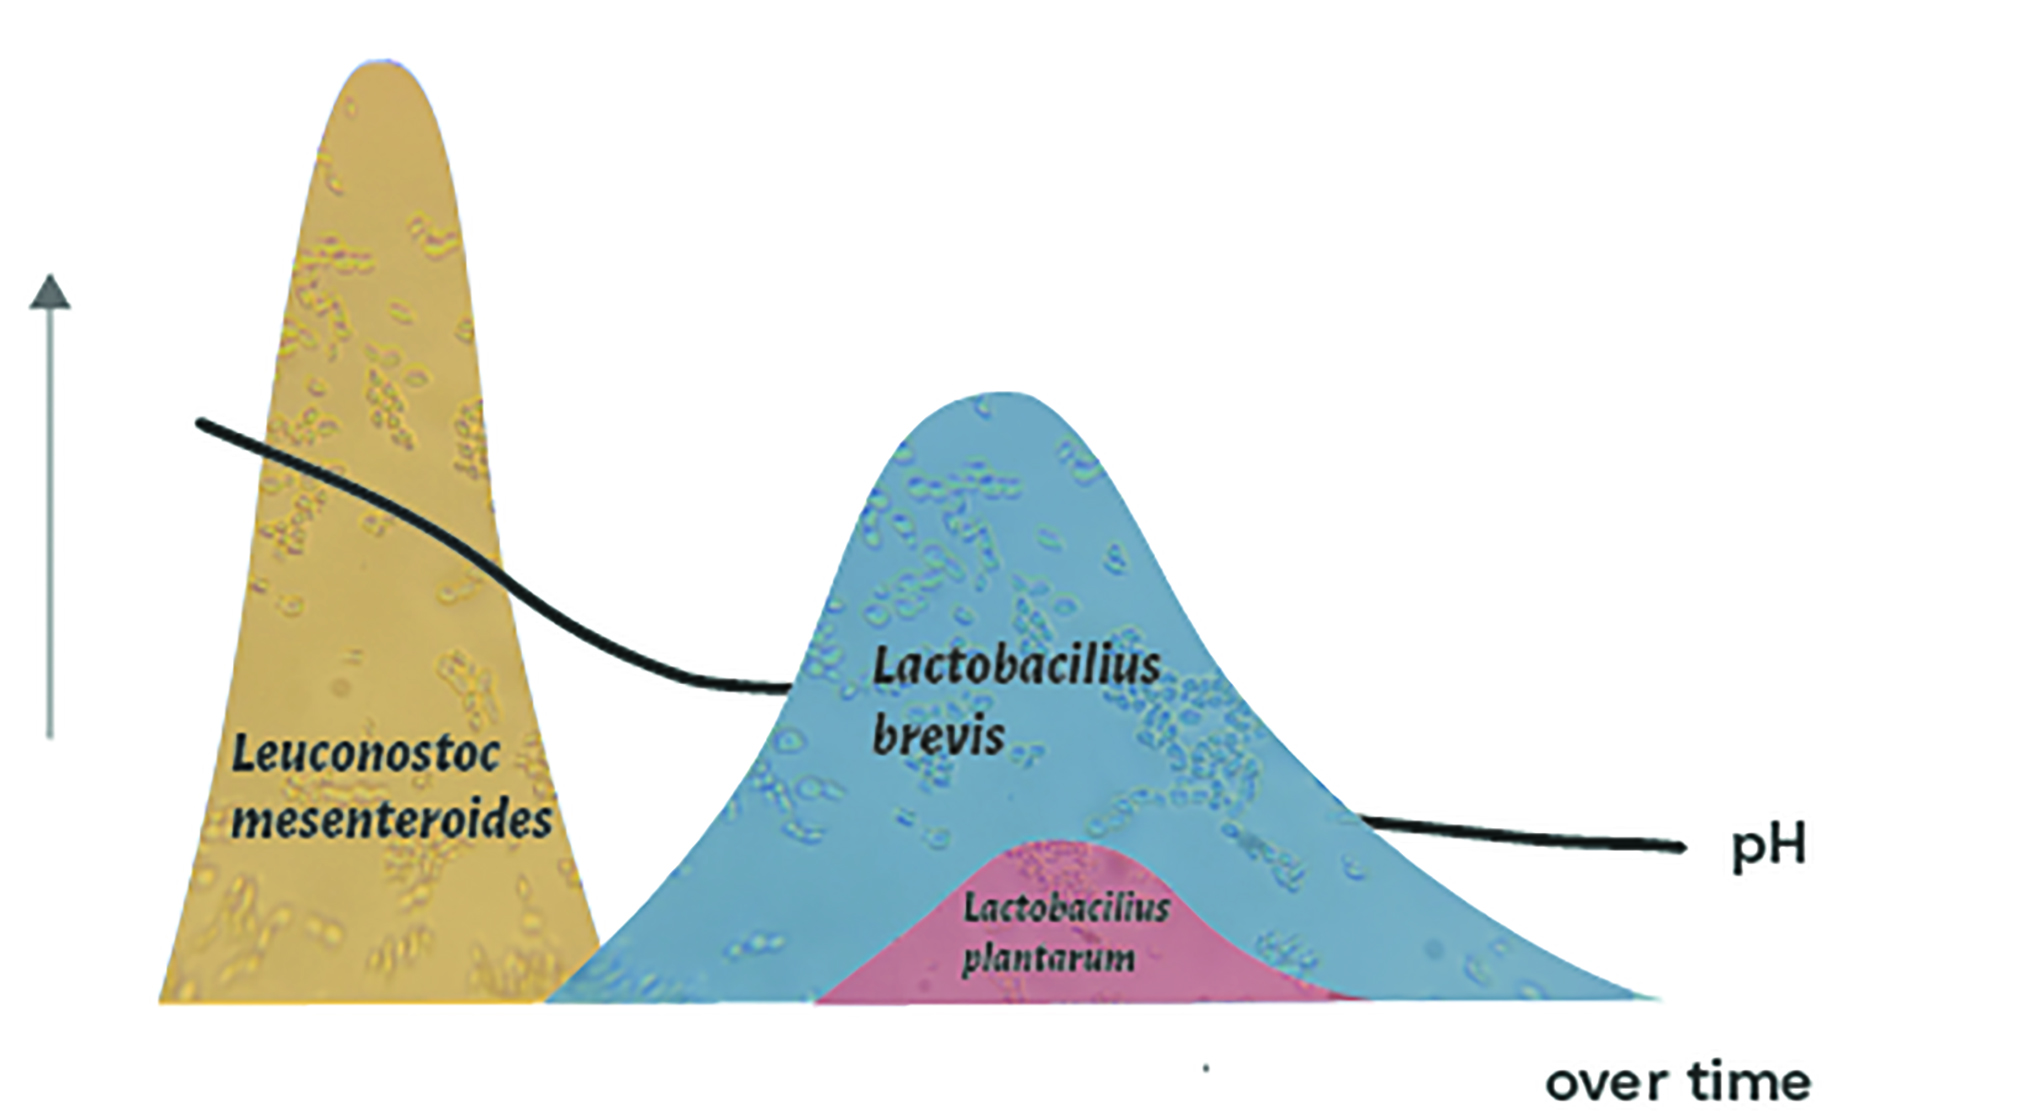 Sketch of different bacteria distributions over time and in relationship to ph. Lactobacillus plantarum has an increase in plantarum early on with high ph. Then ph drops as Lactobacilius brevis and Leuconostoc mesenteroides take over later on in time.